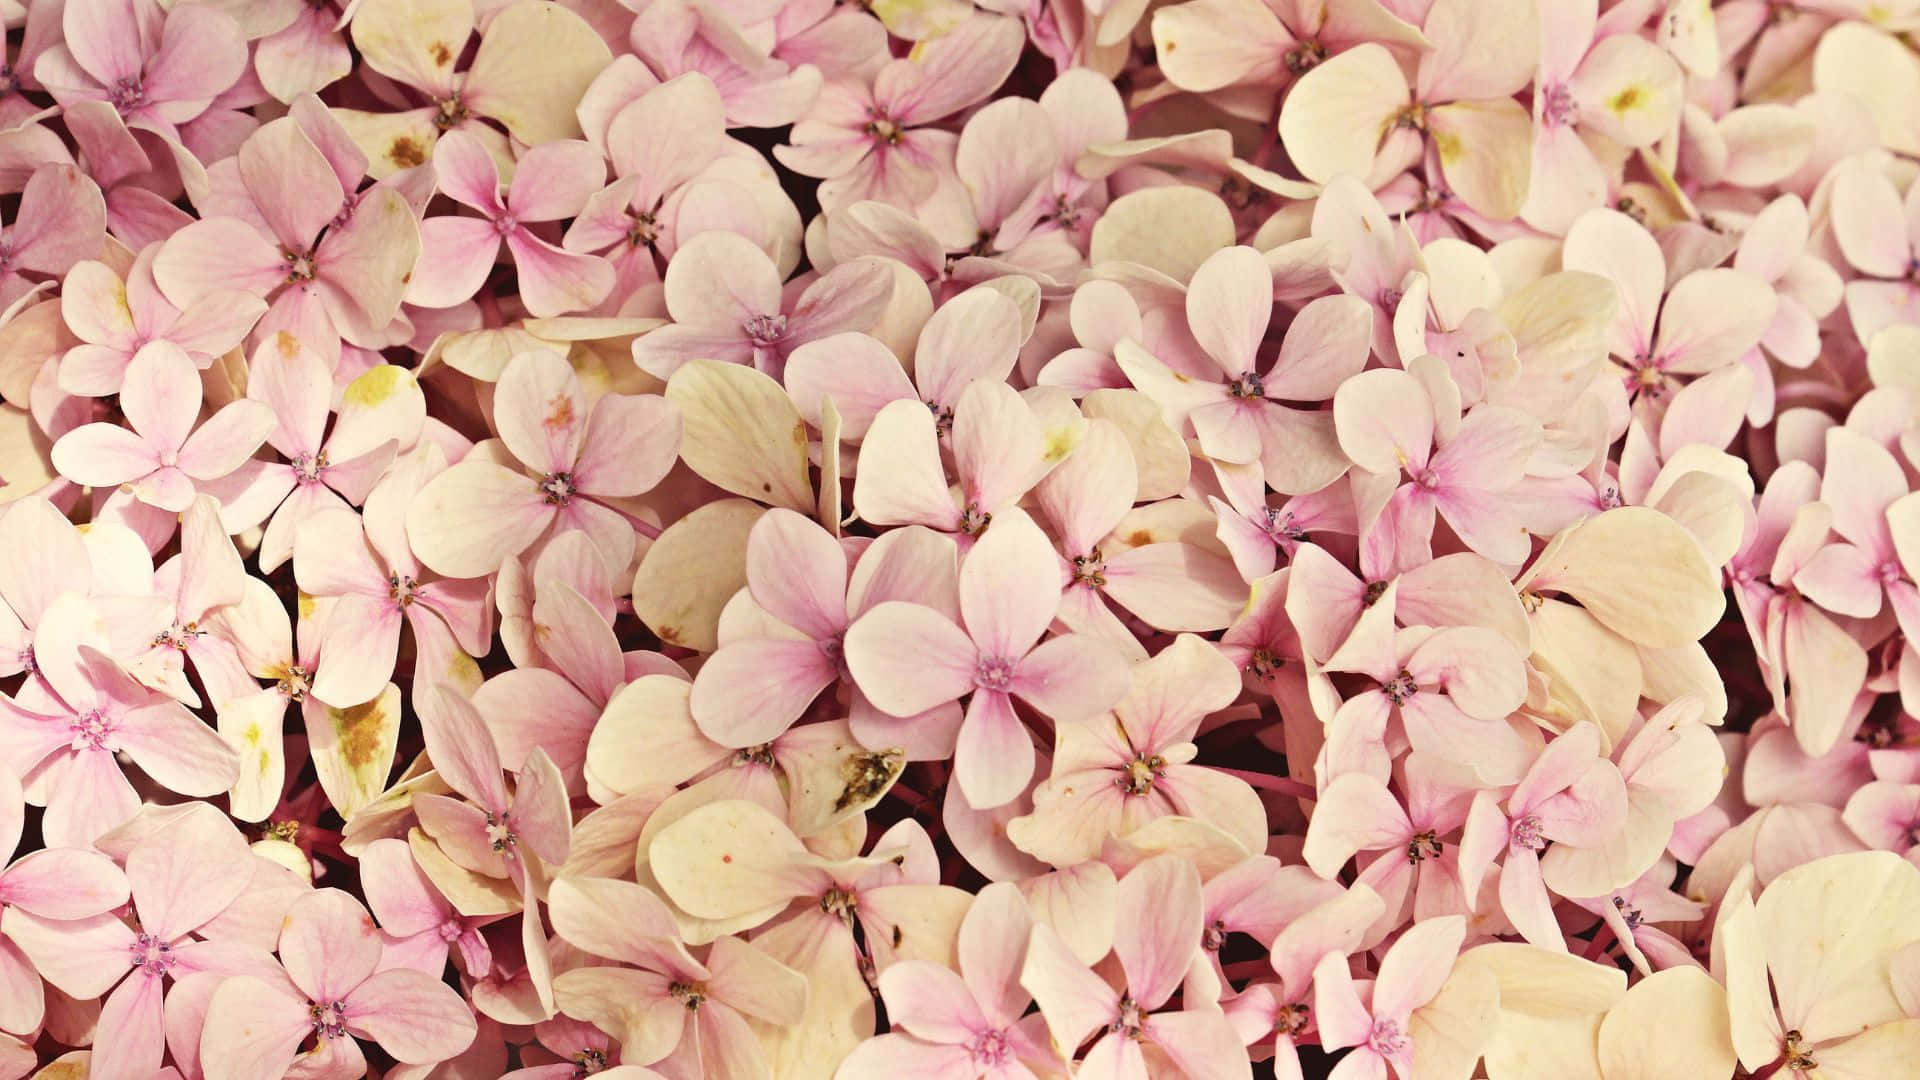 A beautiful, vintage flower background.